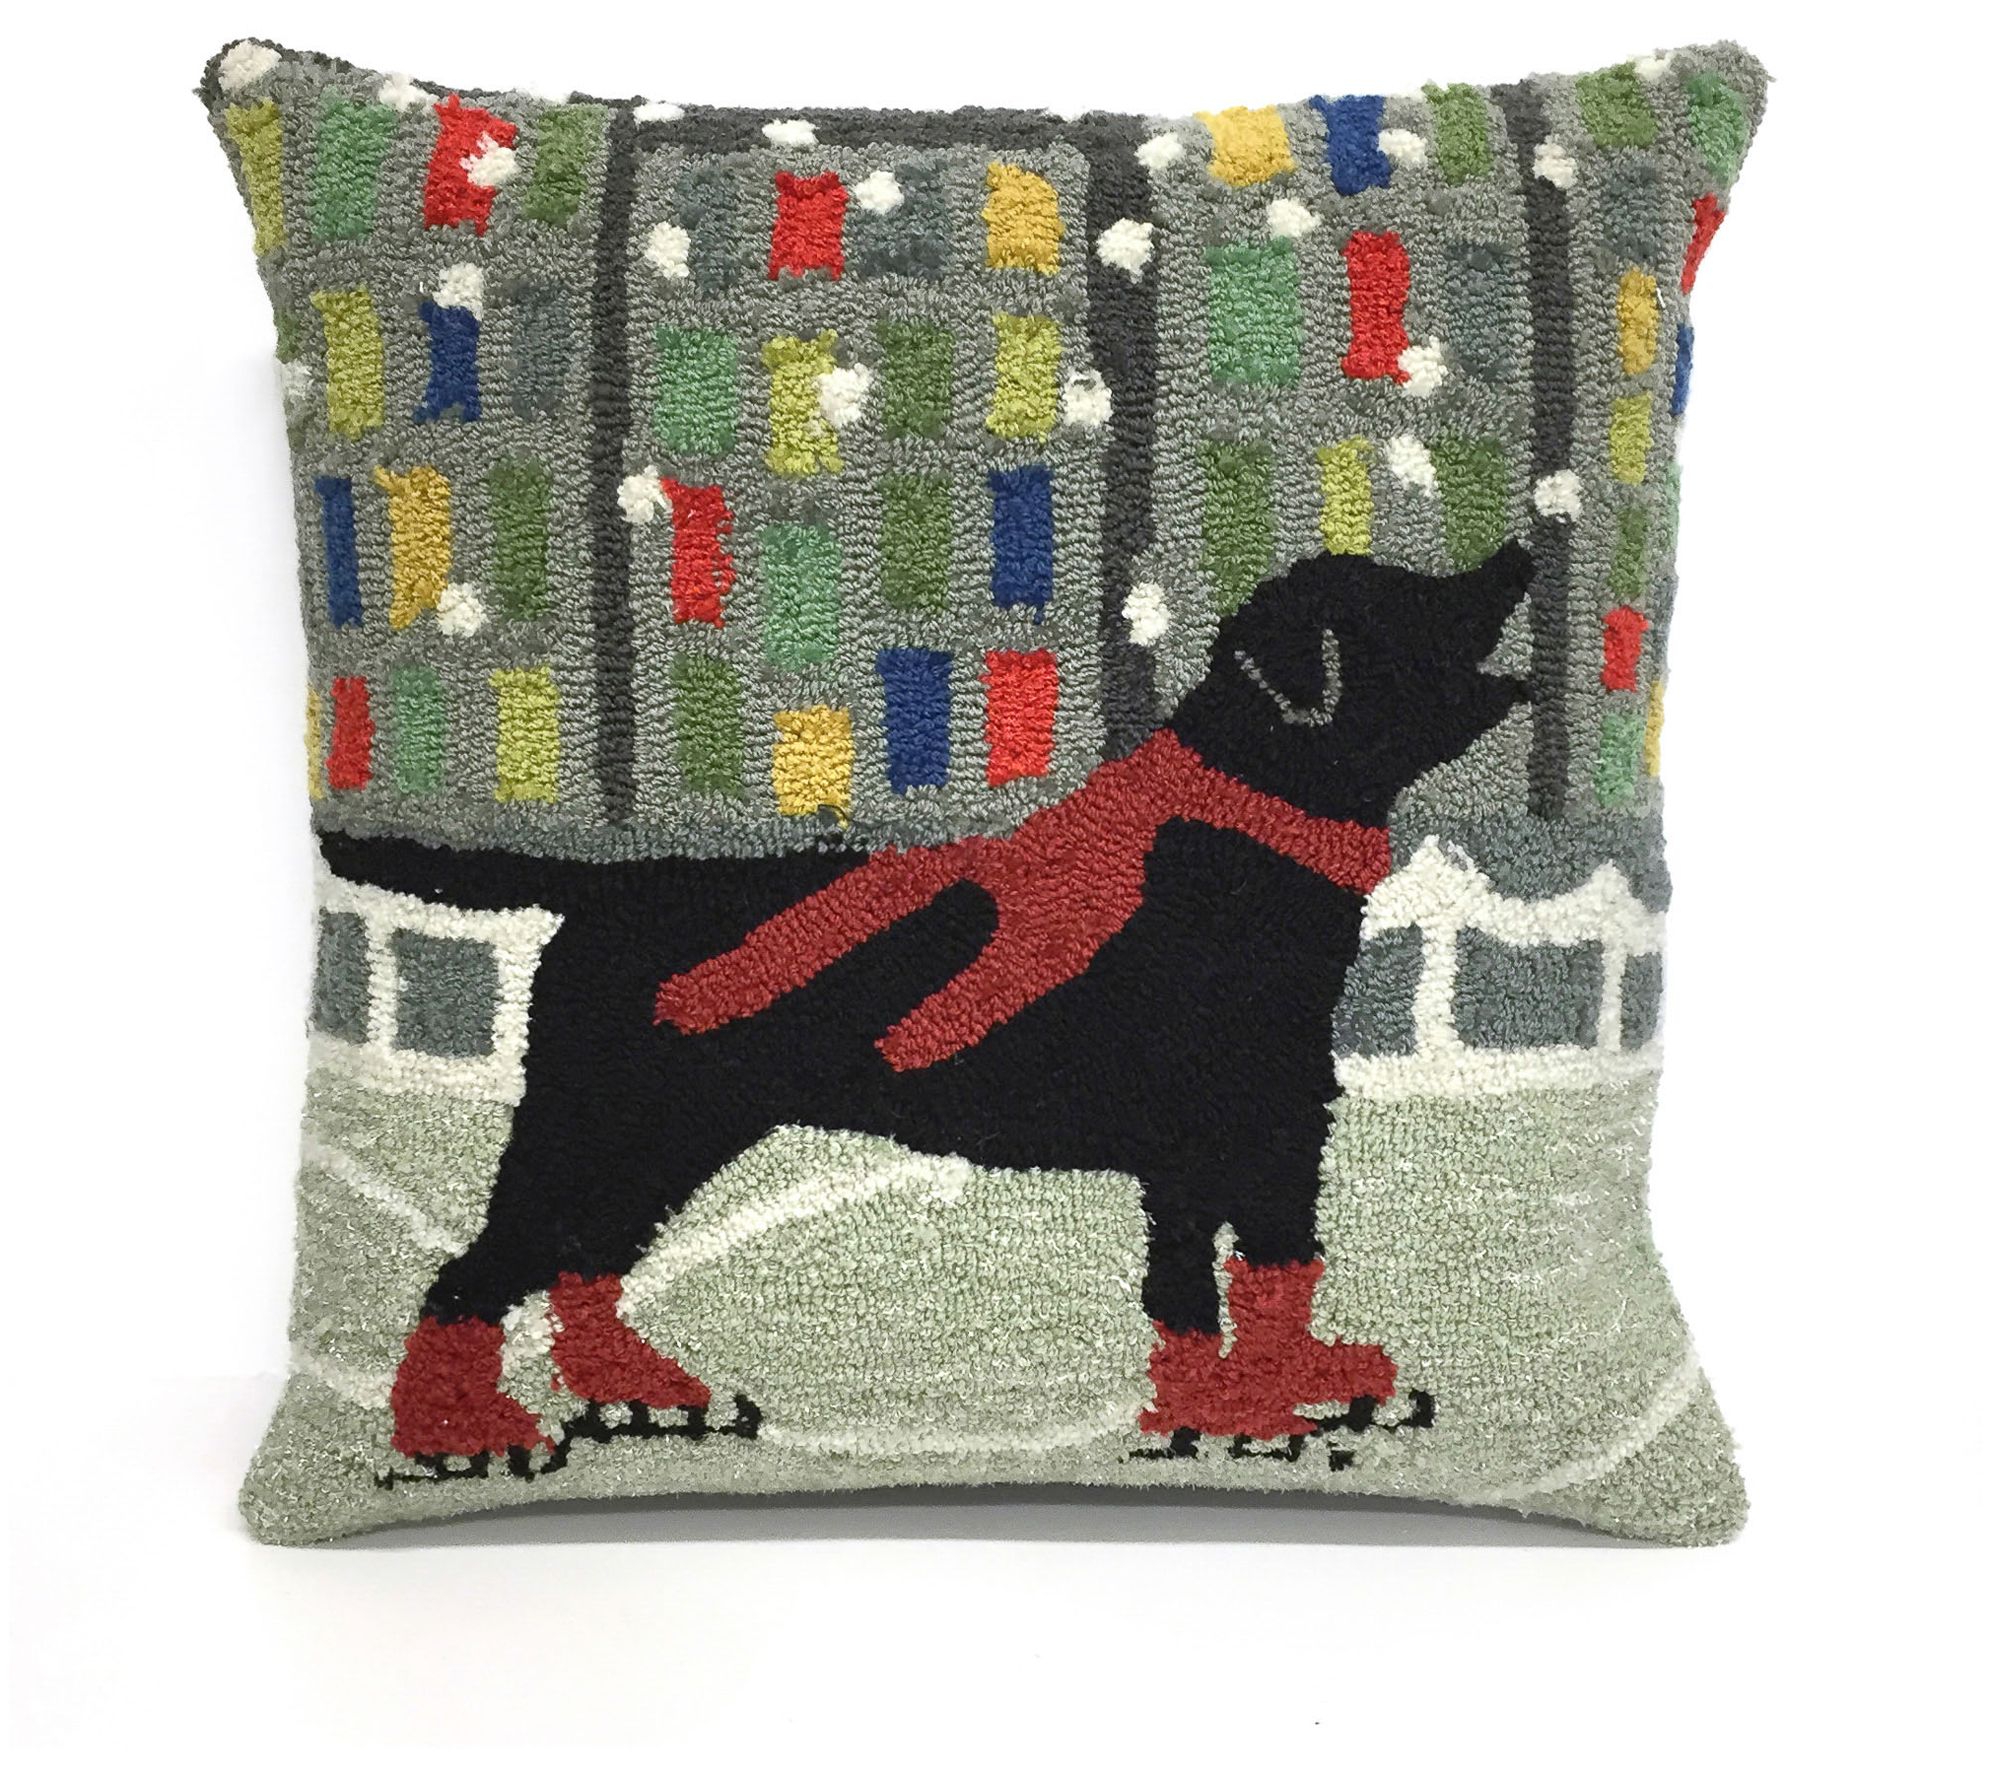 Hand Hooked Pillow, 18x18, Black Lab